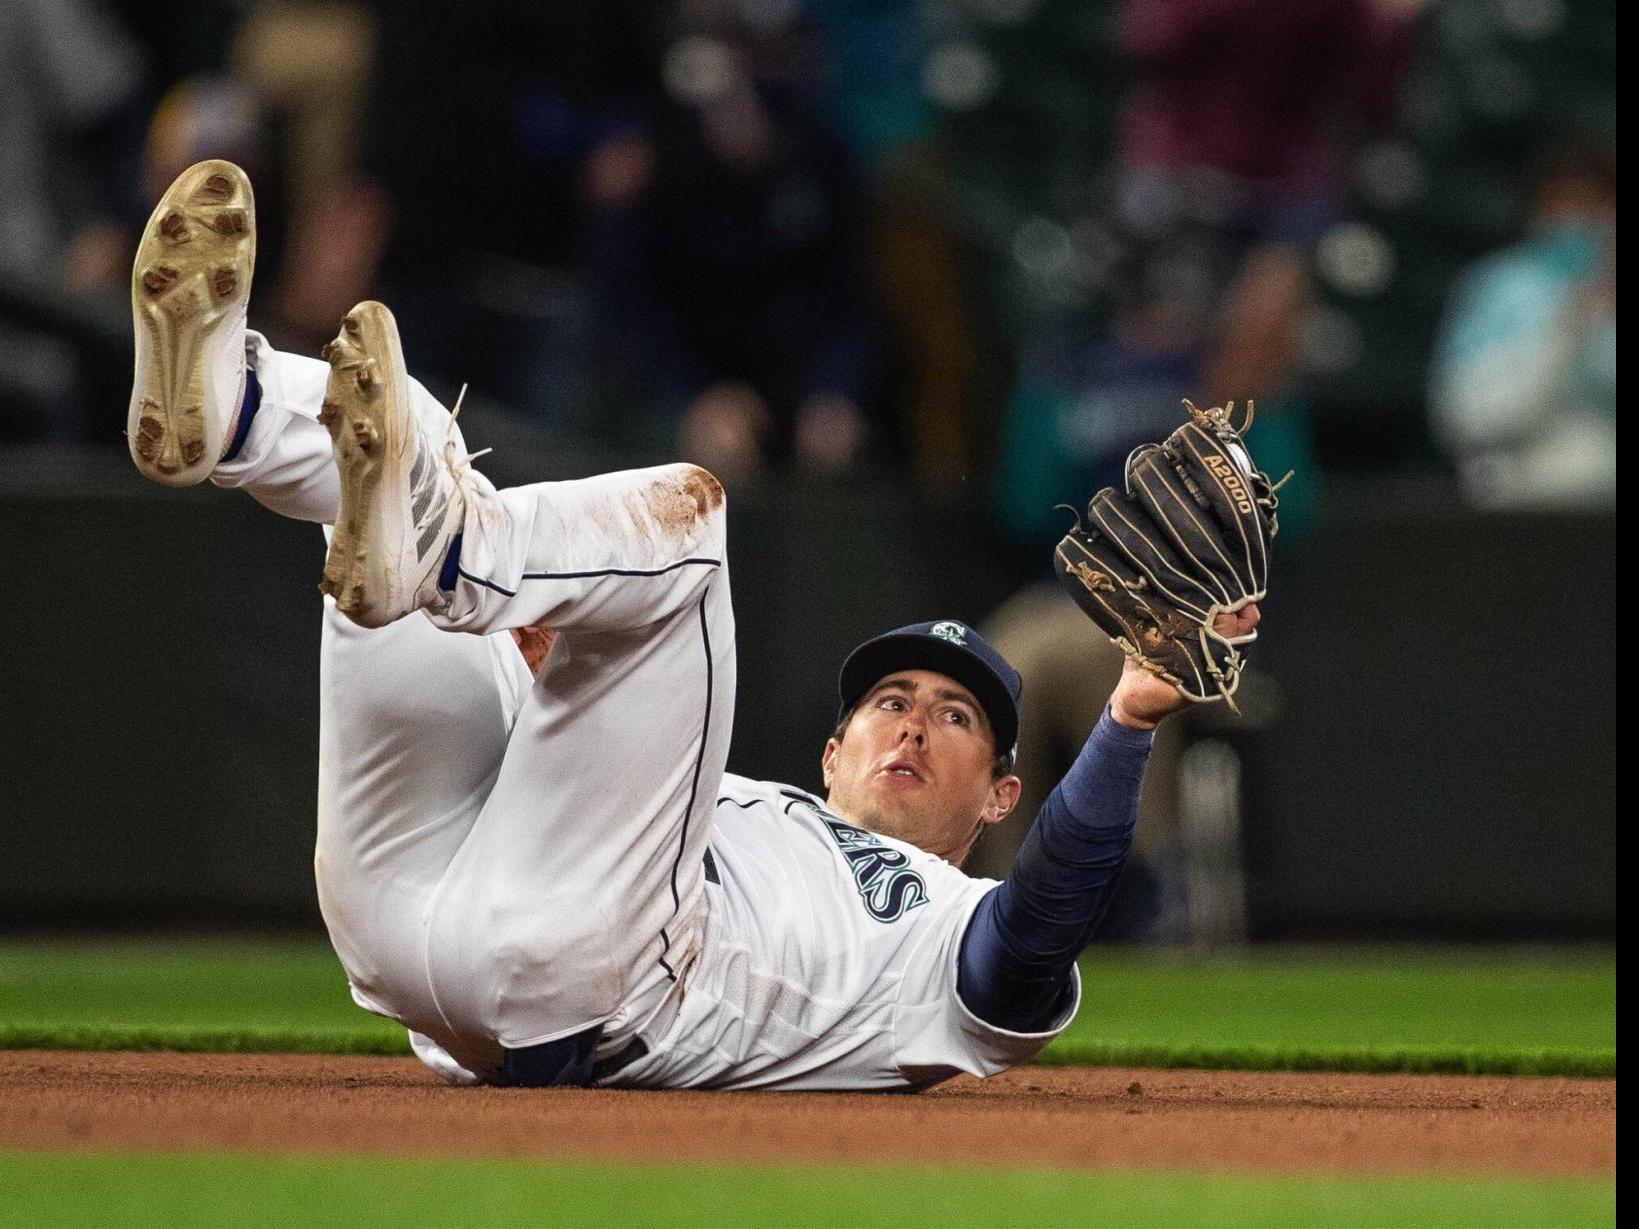 Mariners win on Dylan Moore Walk-Off, showing what could be ahead